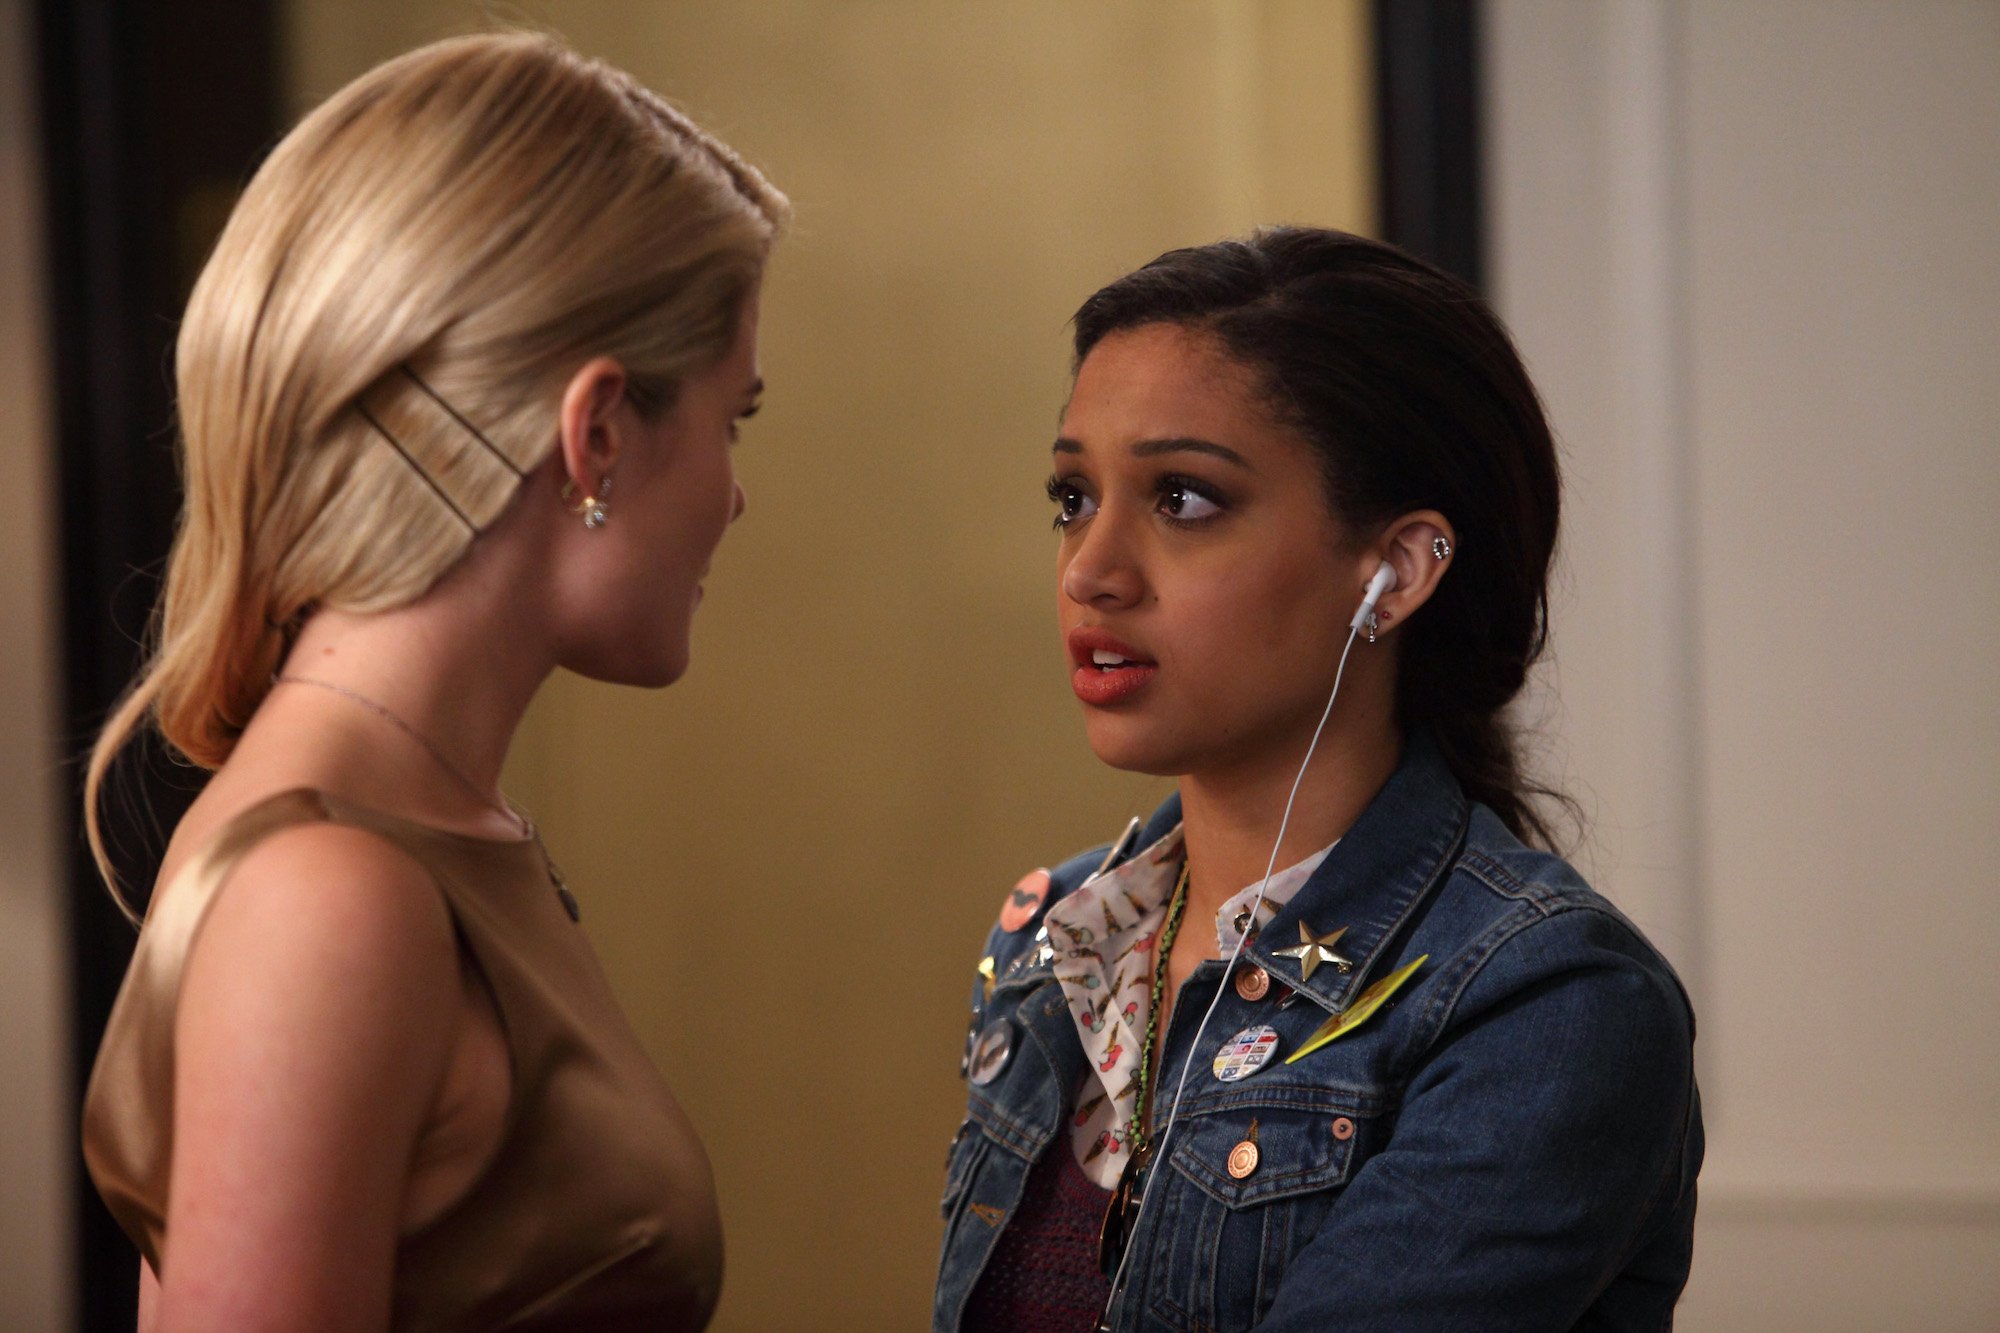 Rachel Taylor, and Samantha Logan talking to each other in ABC's '666 Park Avenue' Season 1.